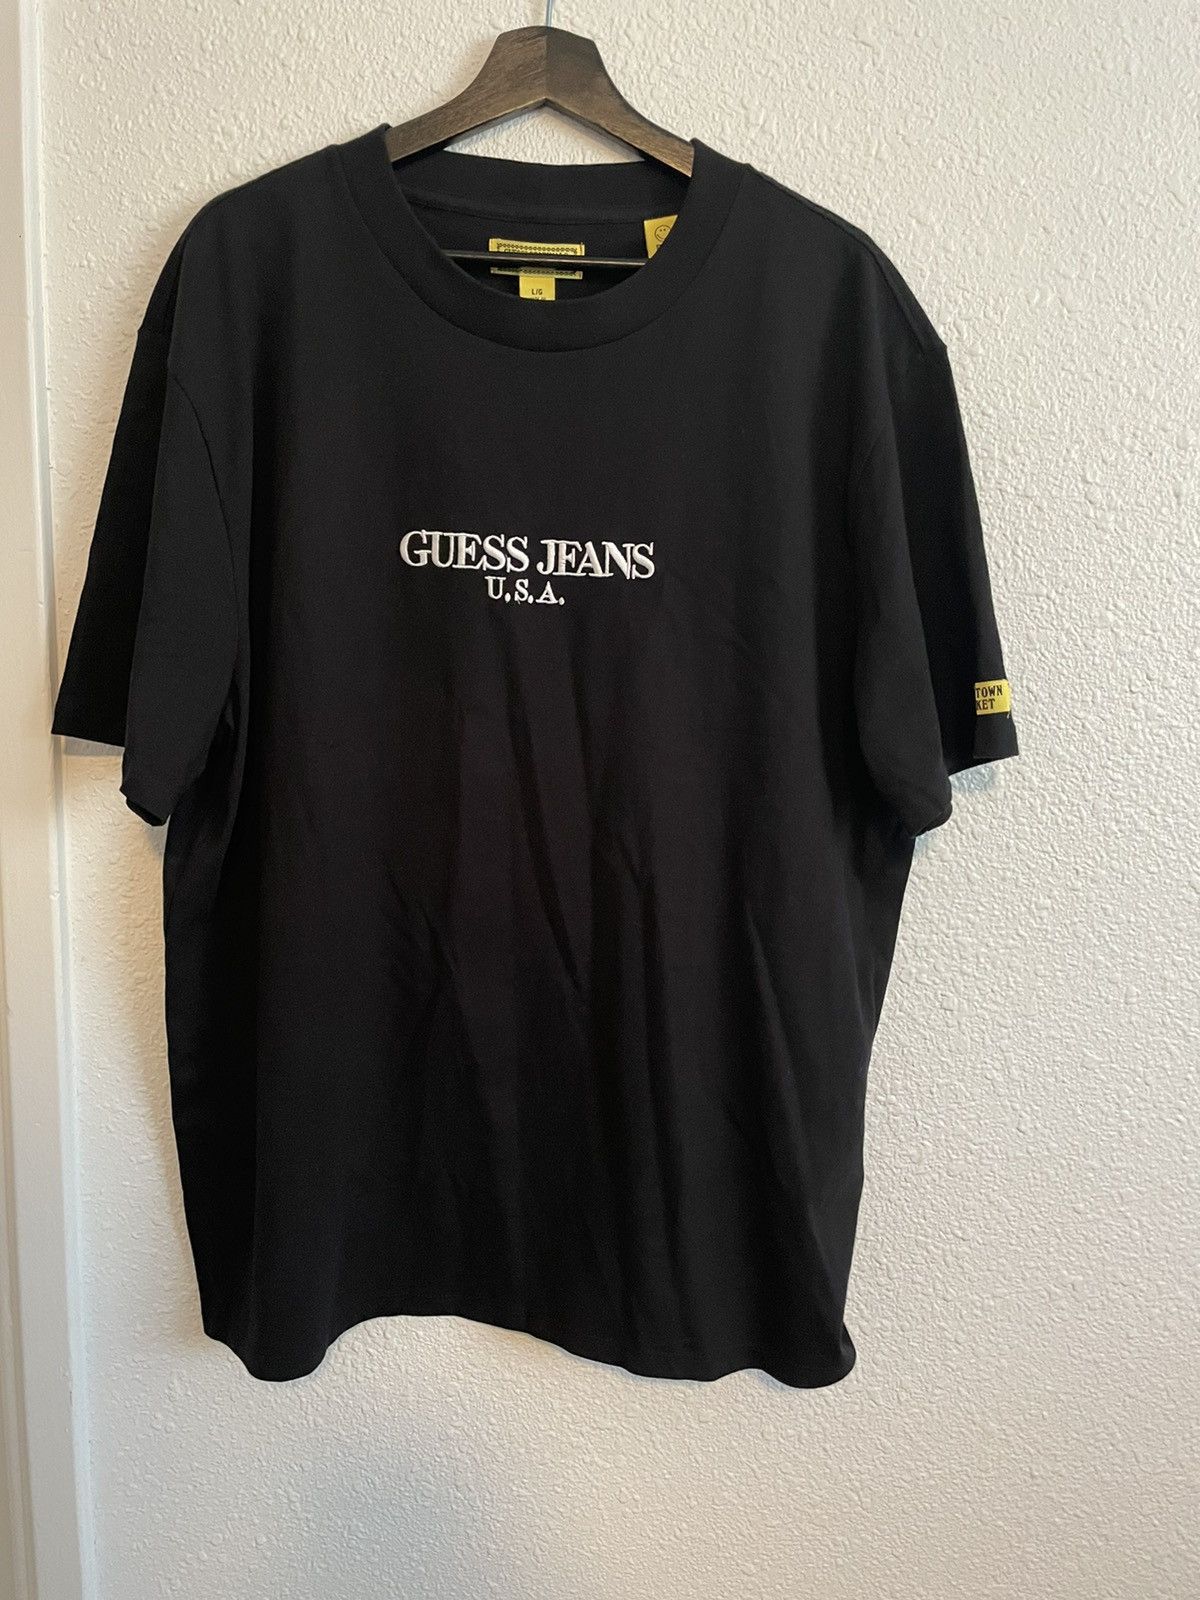 Guess Guess Jeans x Chinatown Market Collab Tee | Grailed